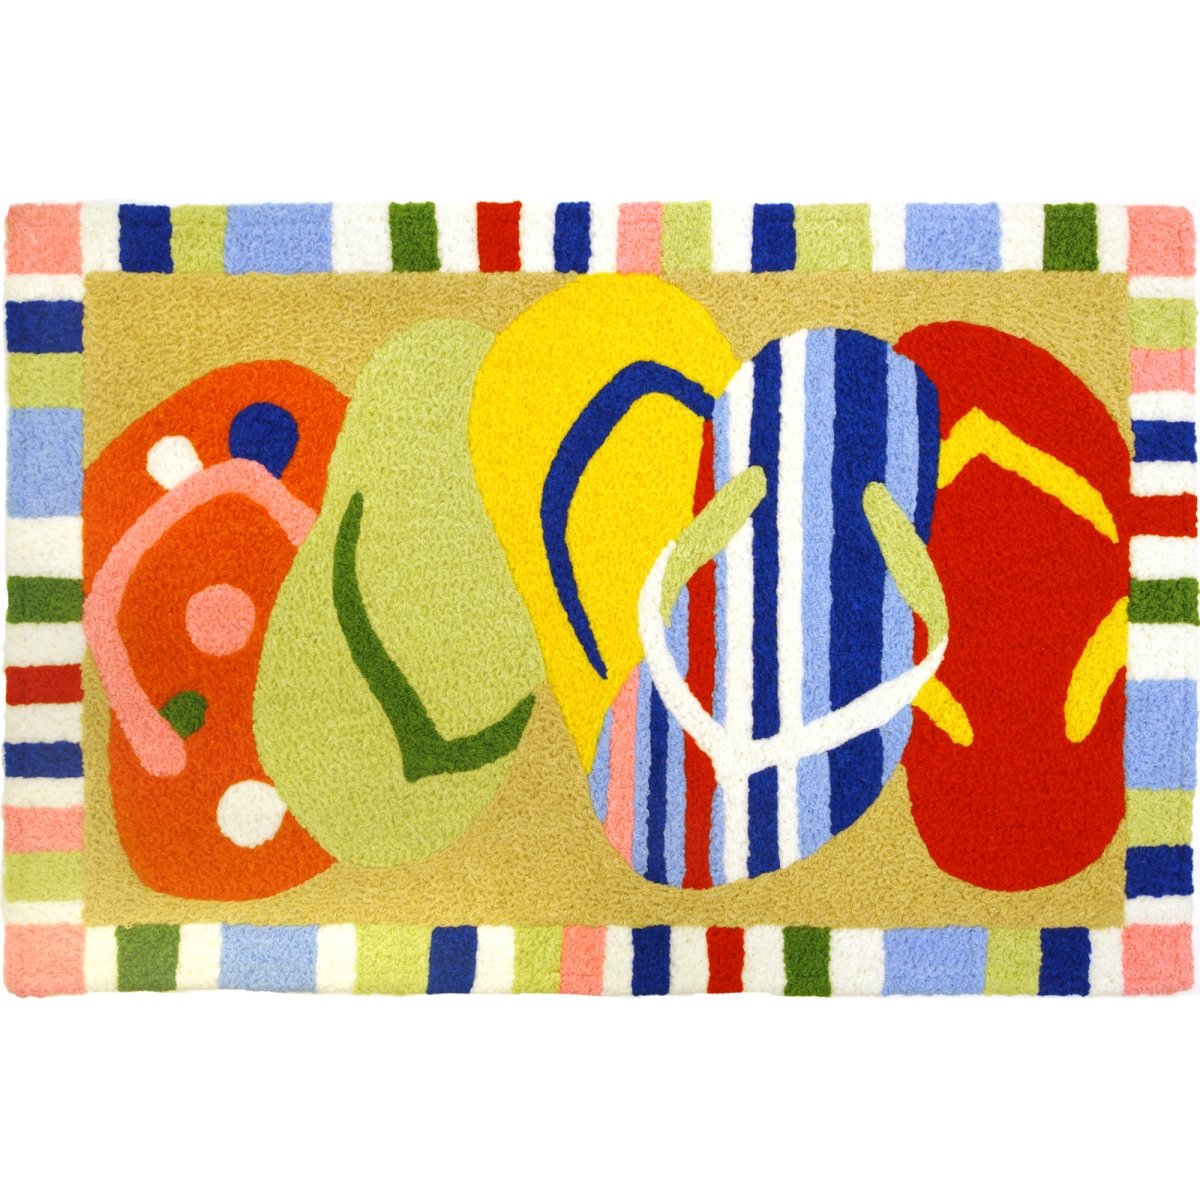 Jb-lwn001 20 X 30 In. Multi-colored Sandals Rug